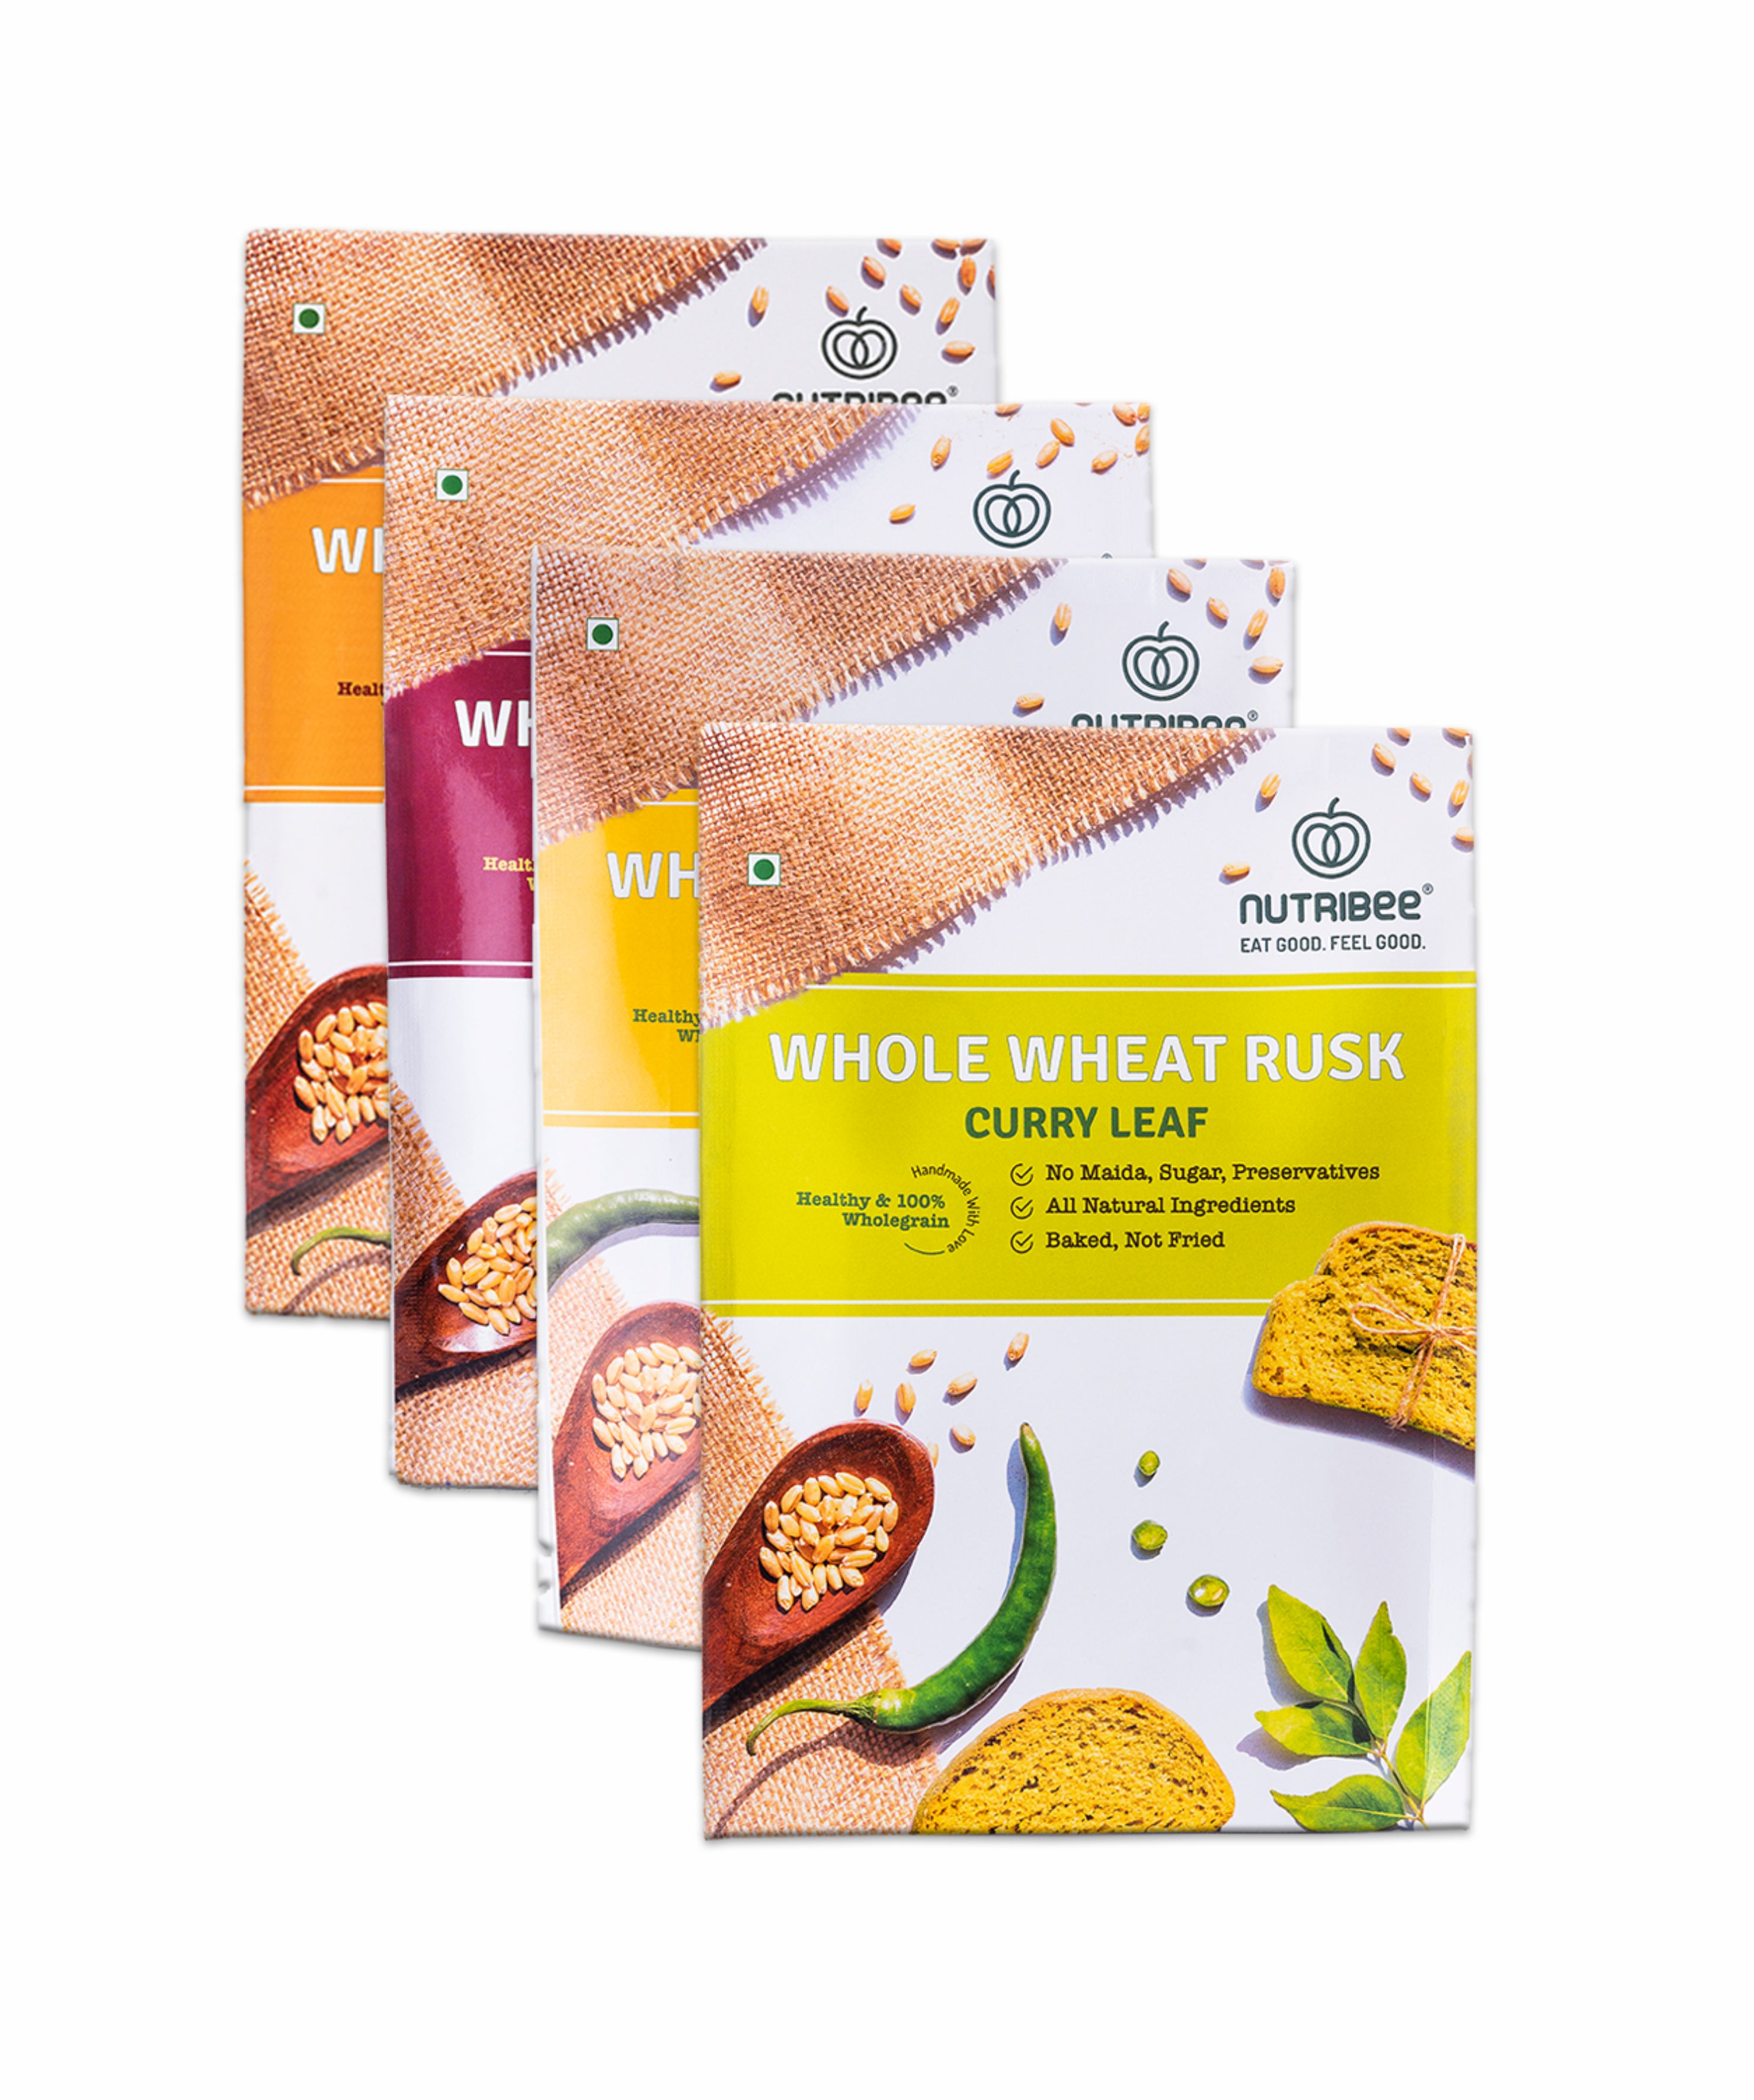 100% Whole Wheat Atta Rusk - 4 Pack Assorted | Refined Sugar-Free | Healthy Diet Toast | No Maida and Sugar | No Preservatives